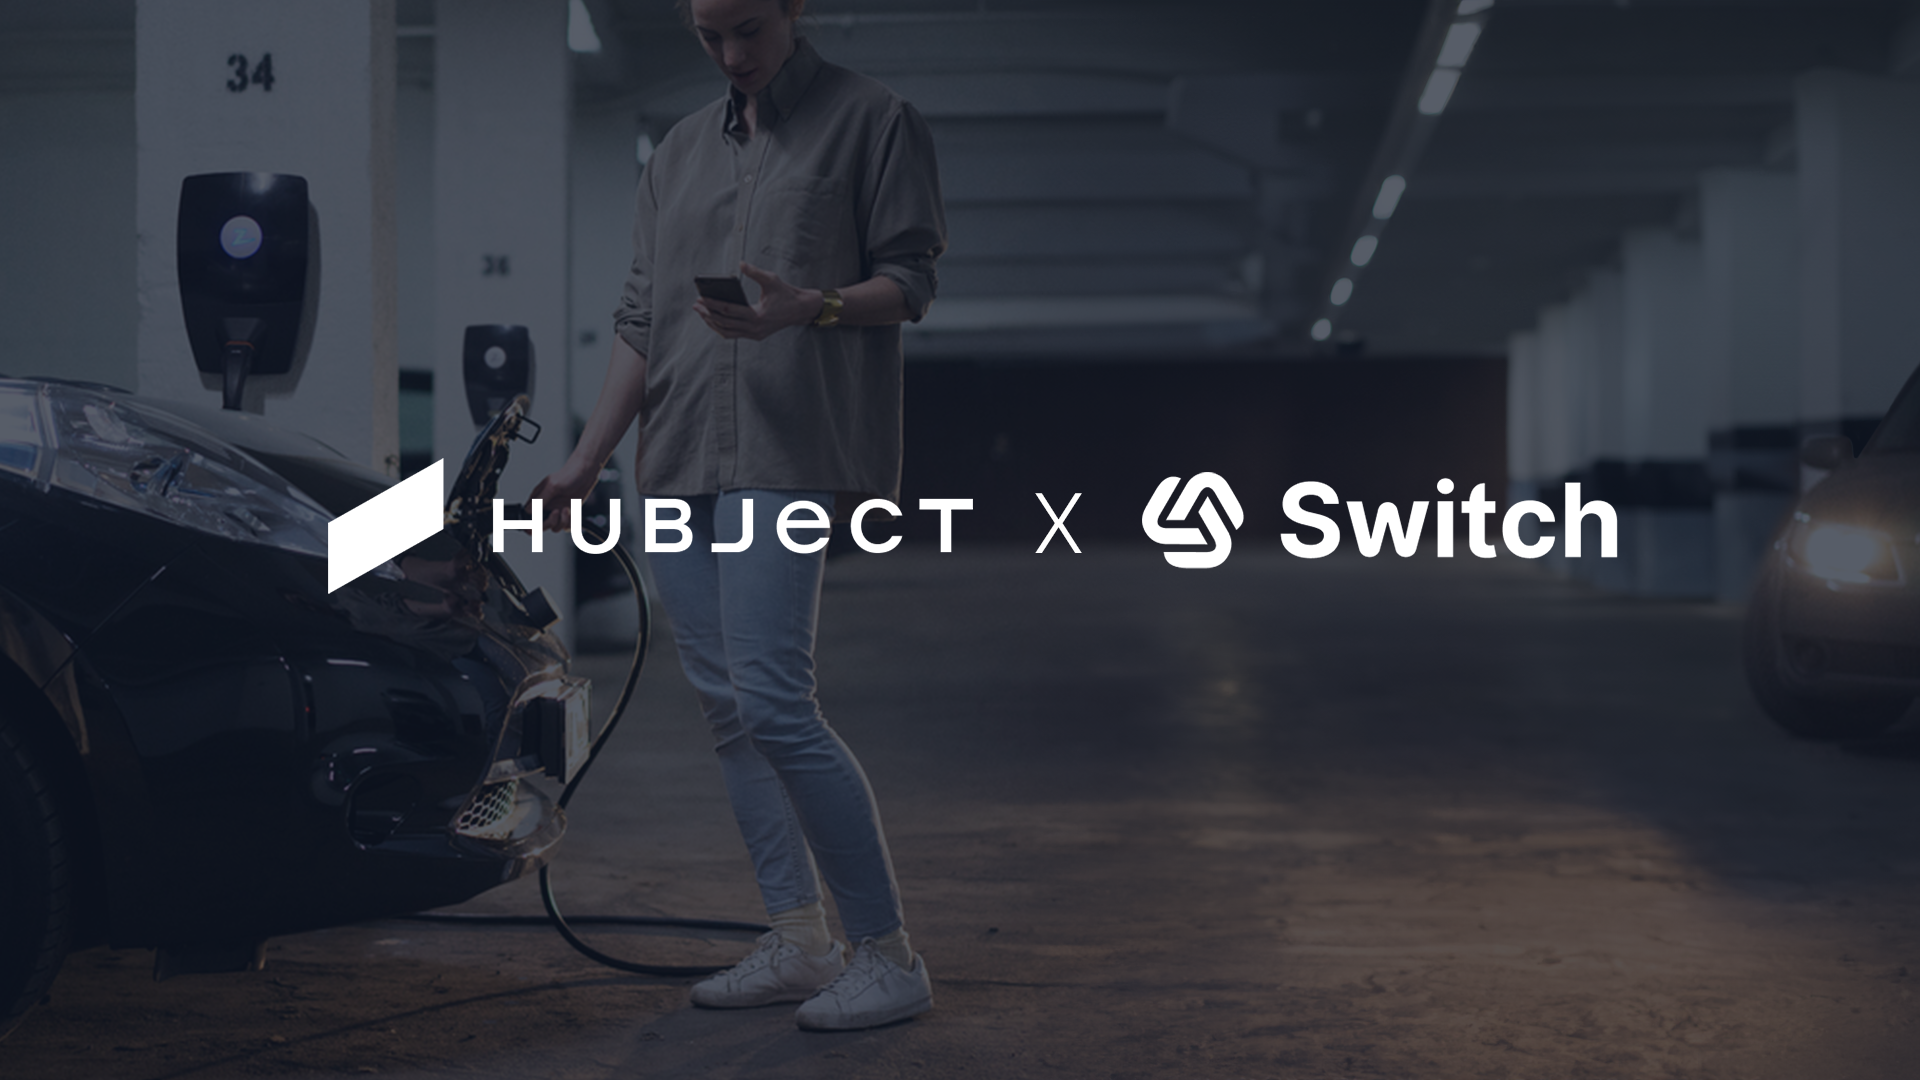 Switch officially Plug & Charge certified by Hubject for next generation EV charging infrastructure at scale